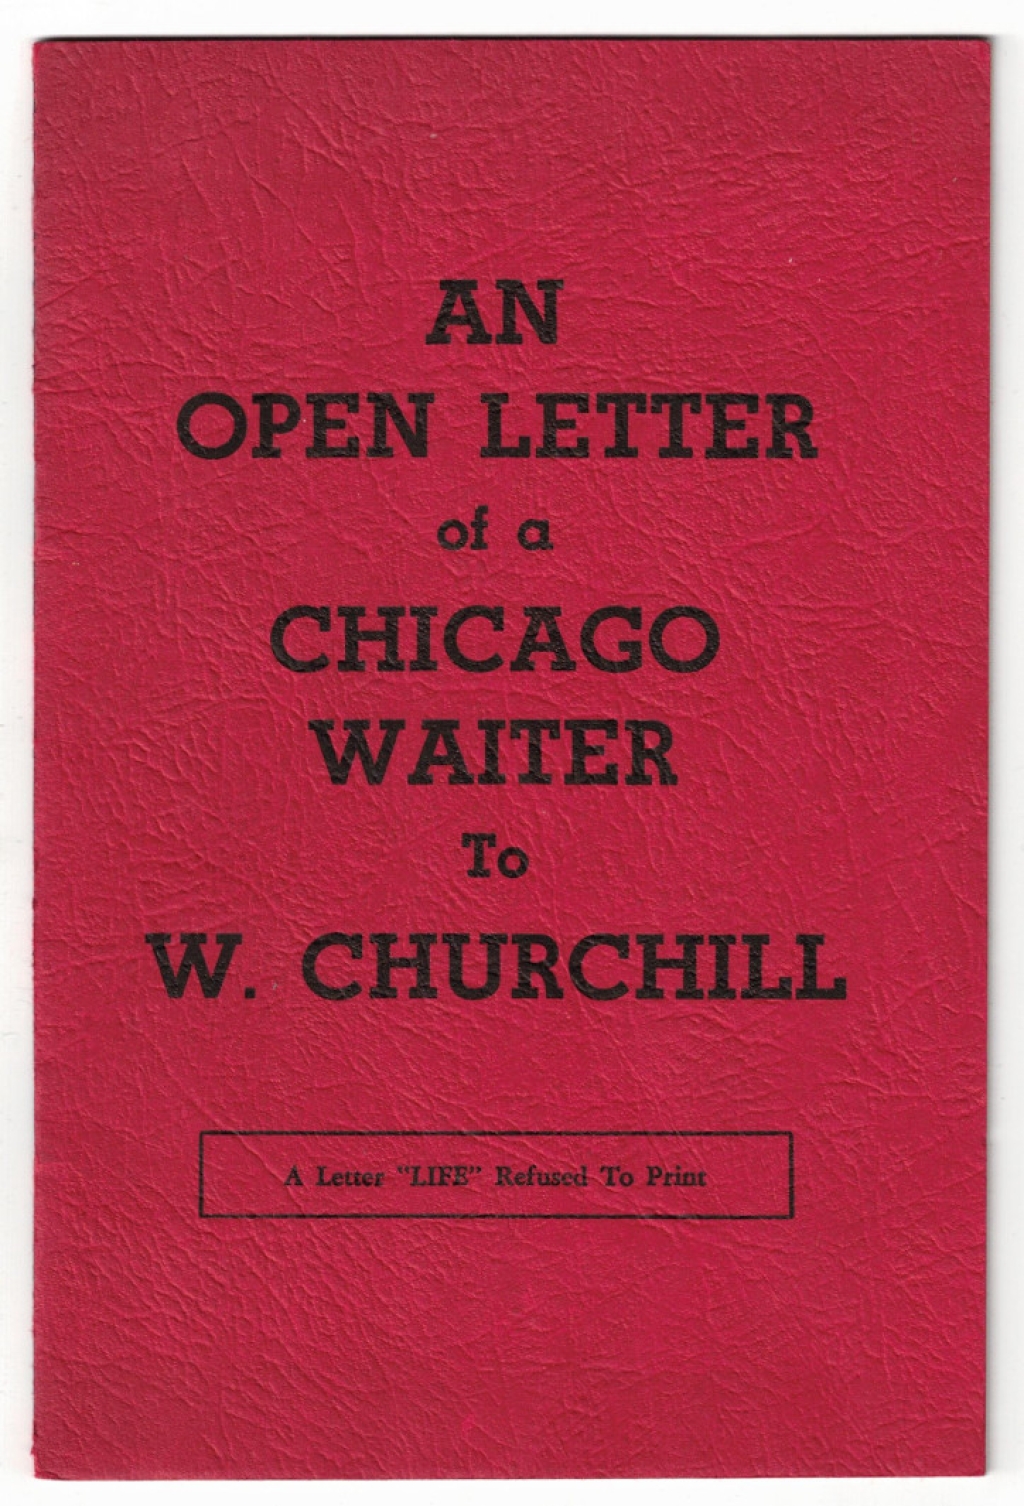 An Open Letter of a Chicago Waiter To Mr. Churchill